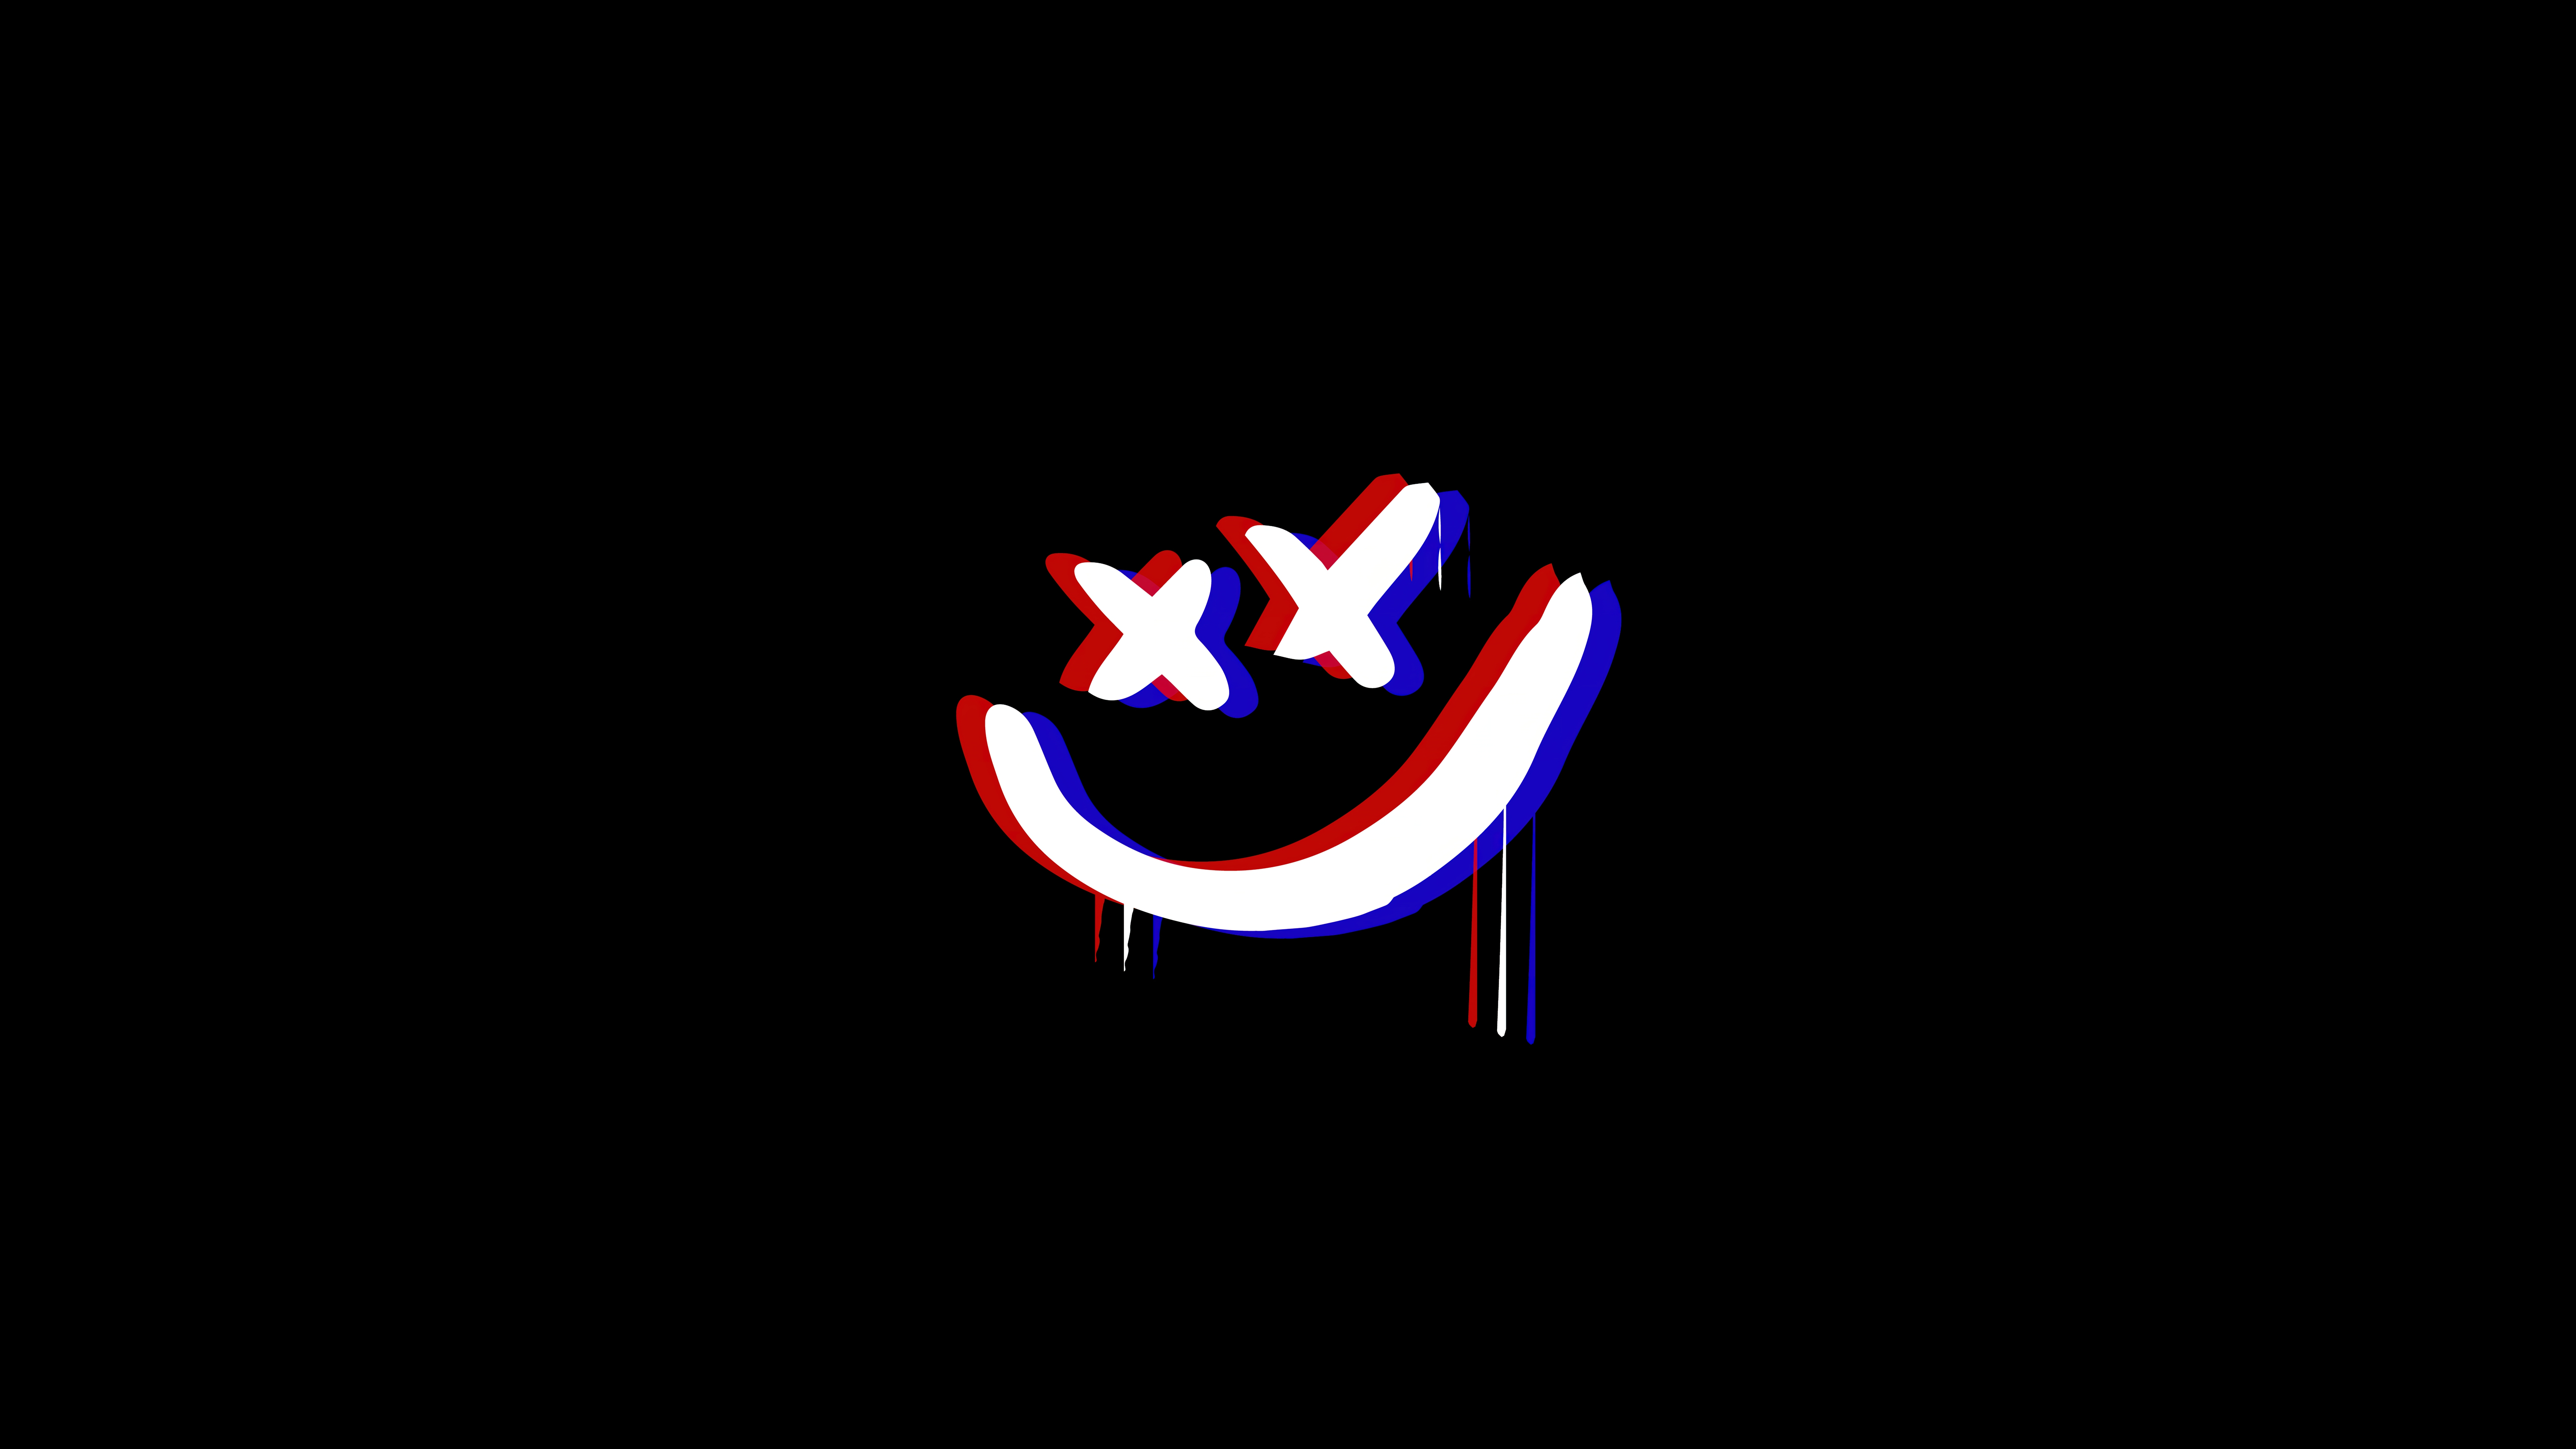 HD wallpaper, Drippy Smiley, Black Background, Anaglyph, Simple, 5K, 8K